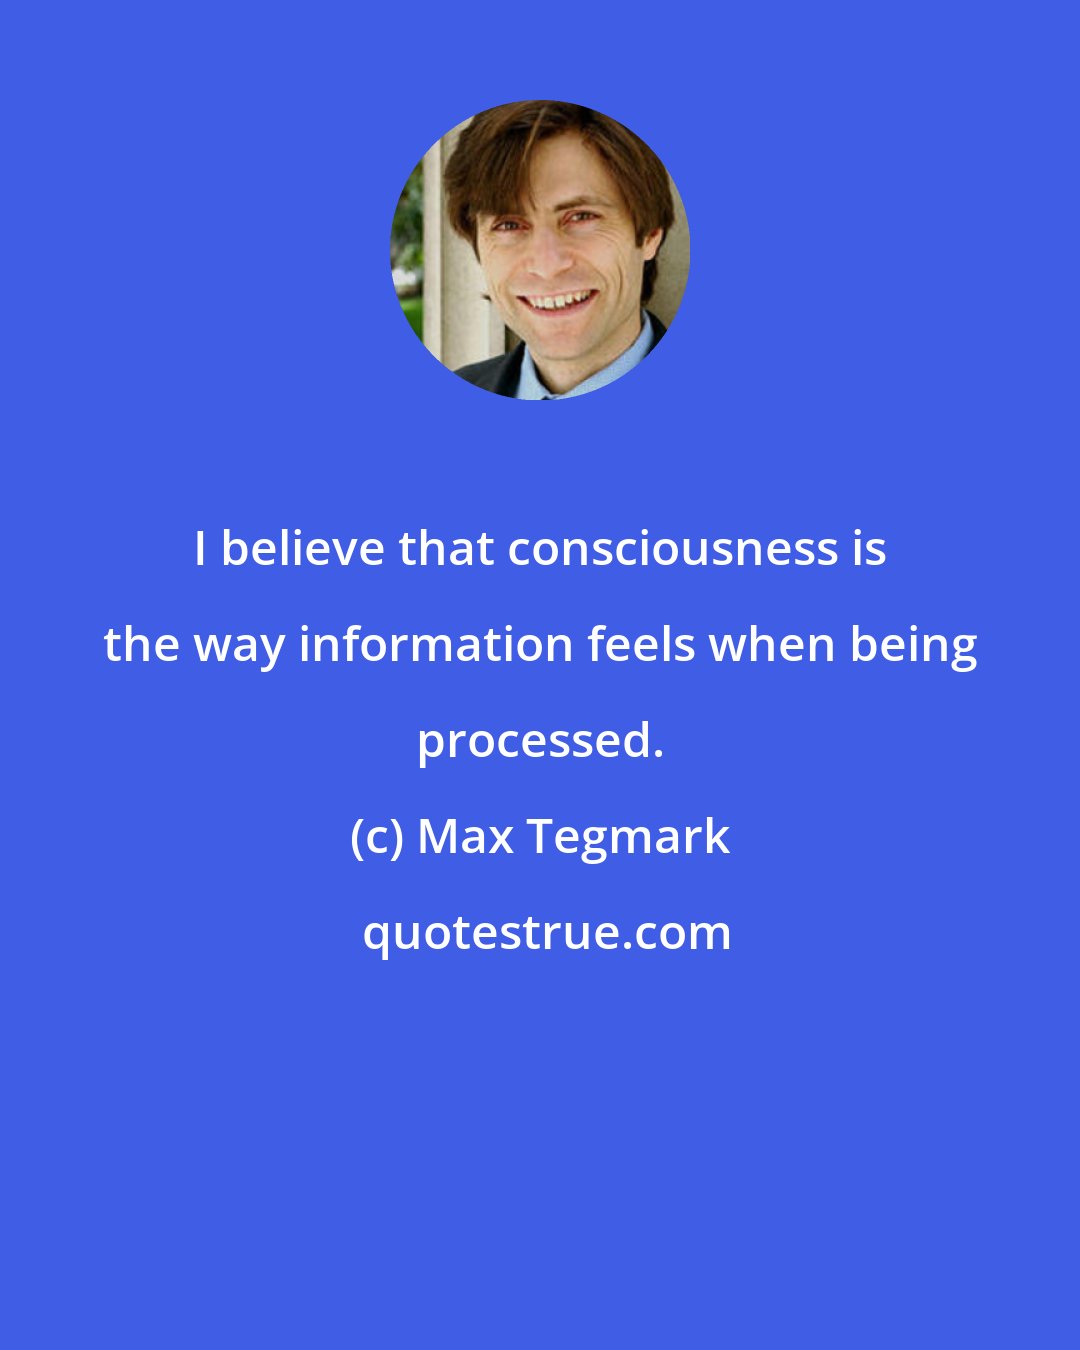 Max Tegmark: I believe that consciousness is the way information feels when being processed.